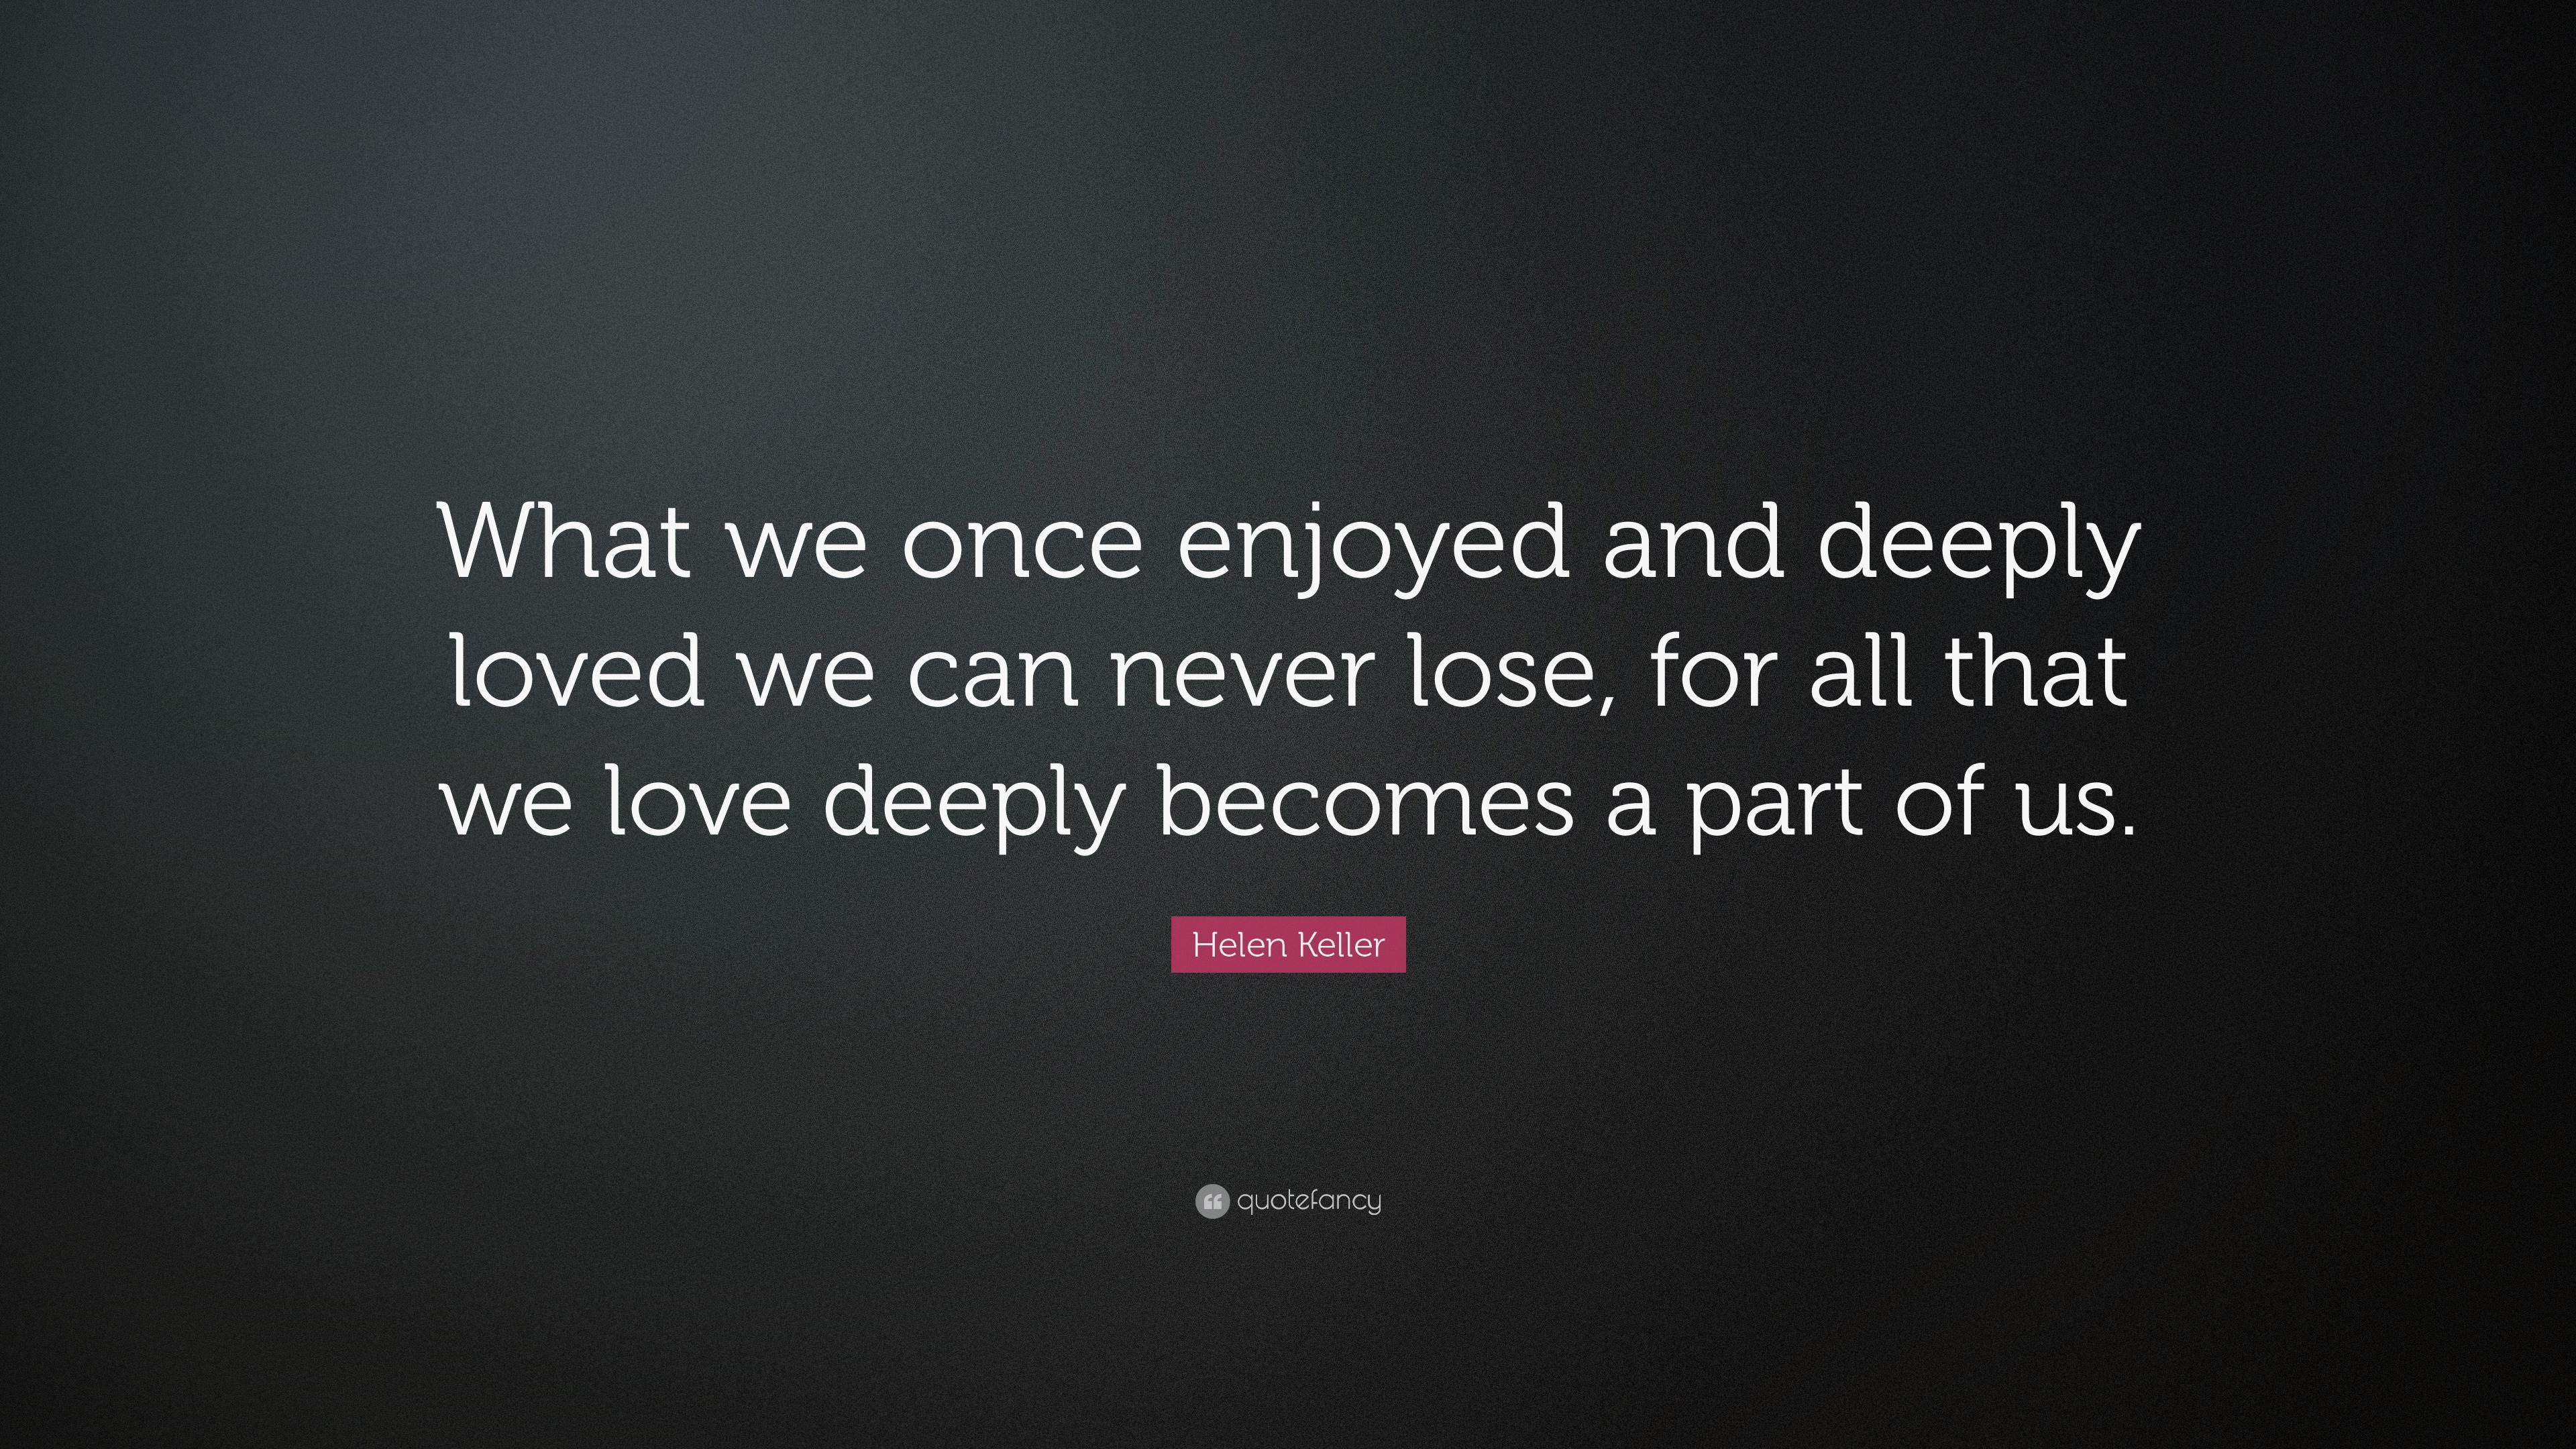 Helen Keller Quote “What we once enjoyed and deeply loved we can never lose